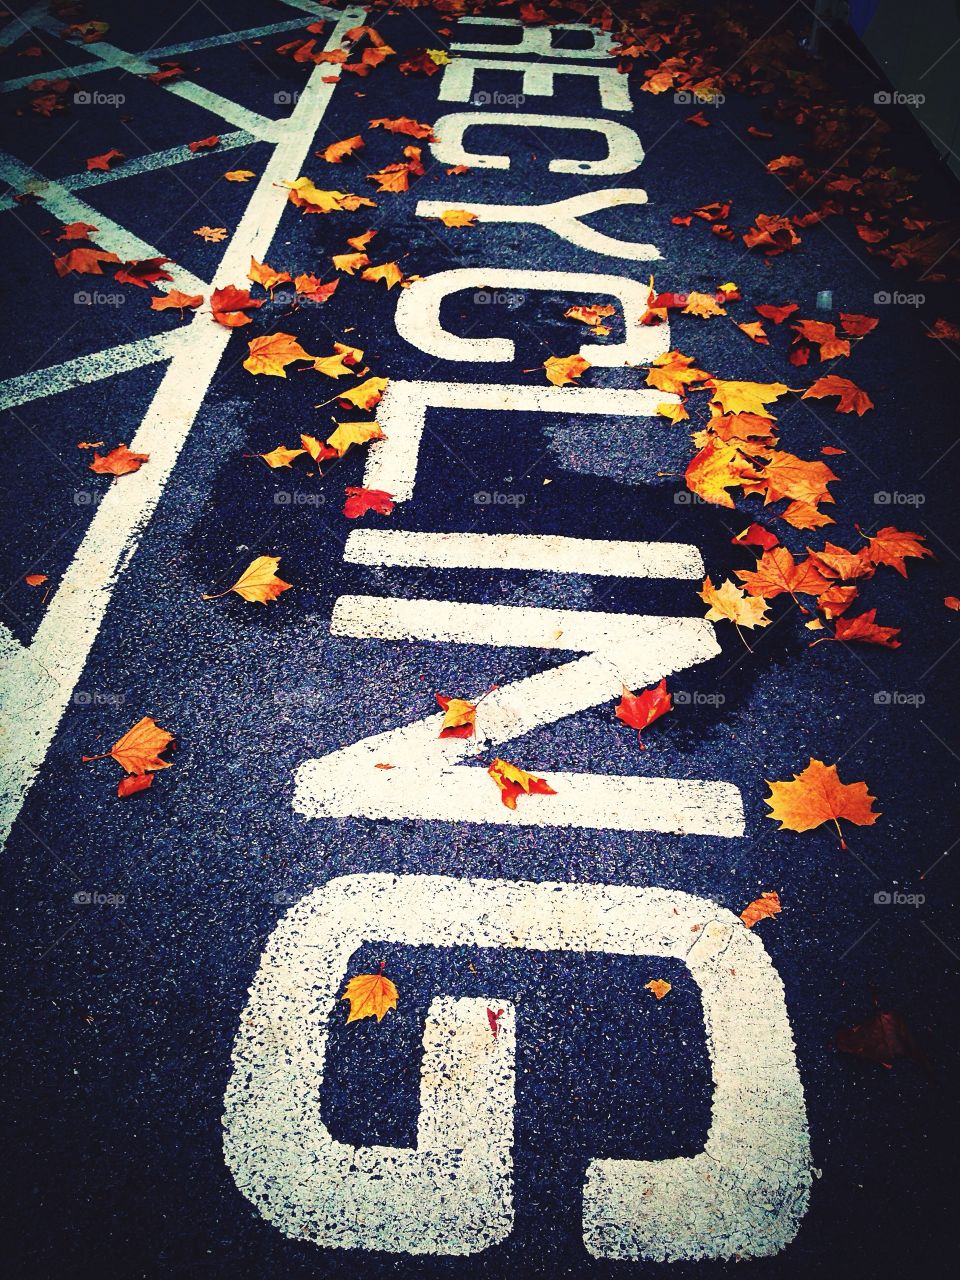 Recycling white floor sign on pavement with scattered autumn leaves 